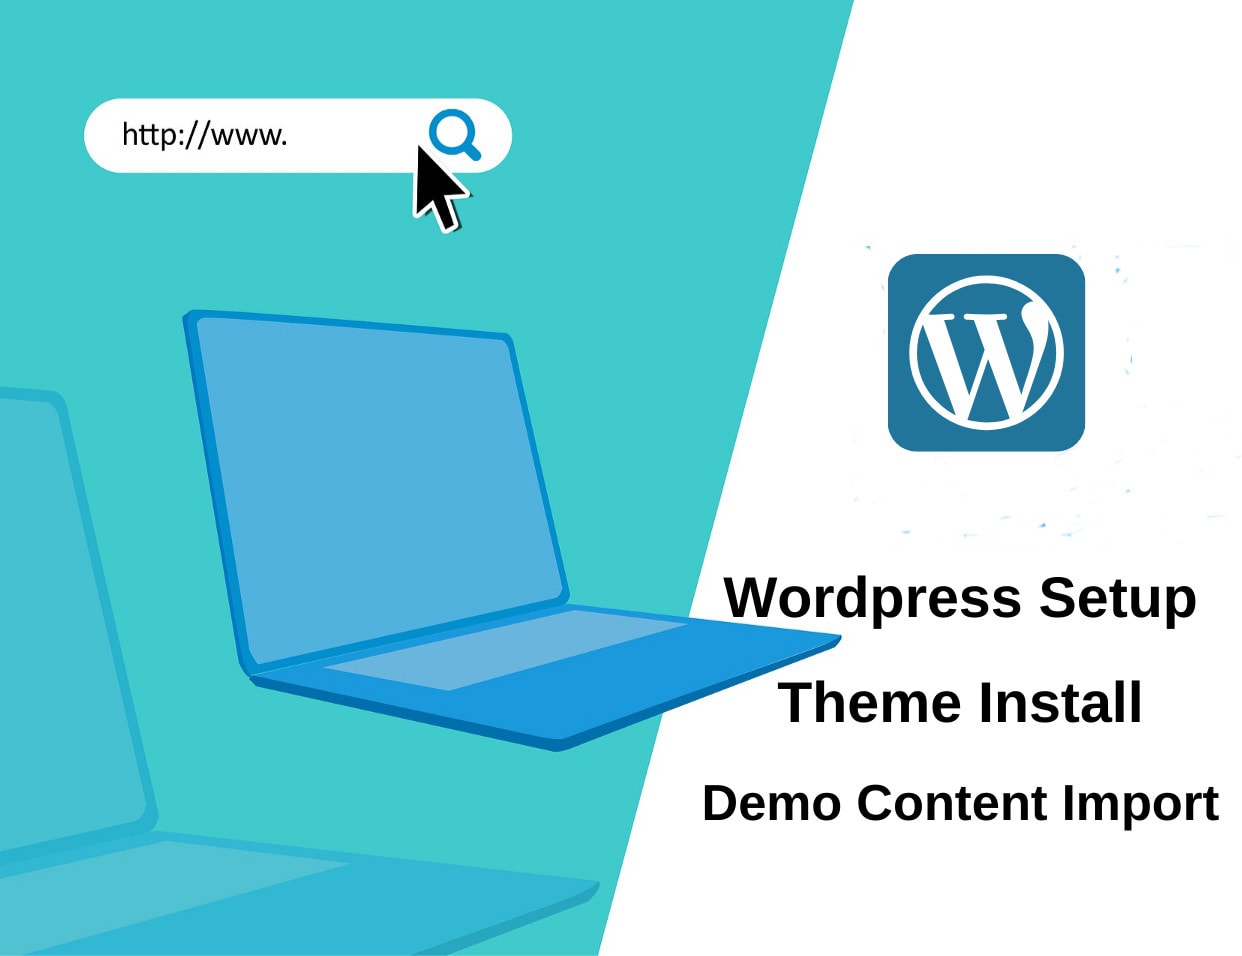 install any wordpress theme and fix wp issues